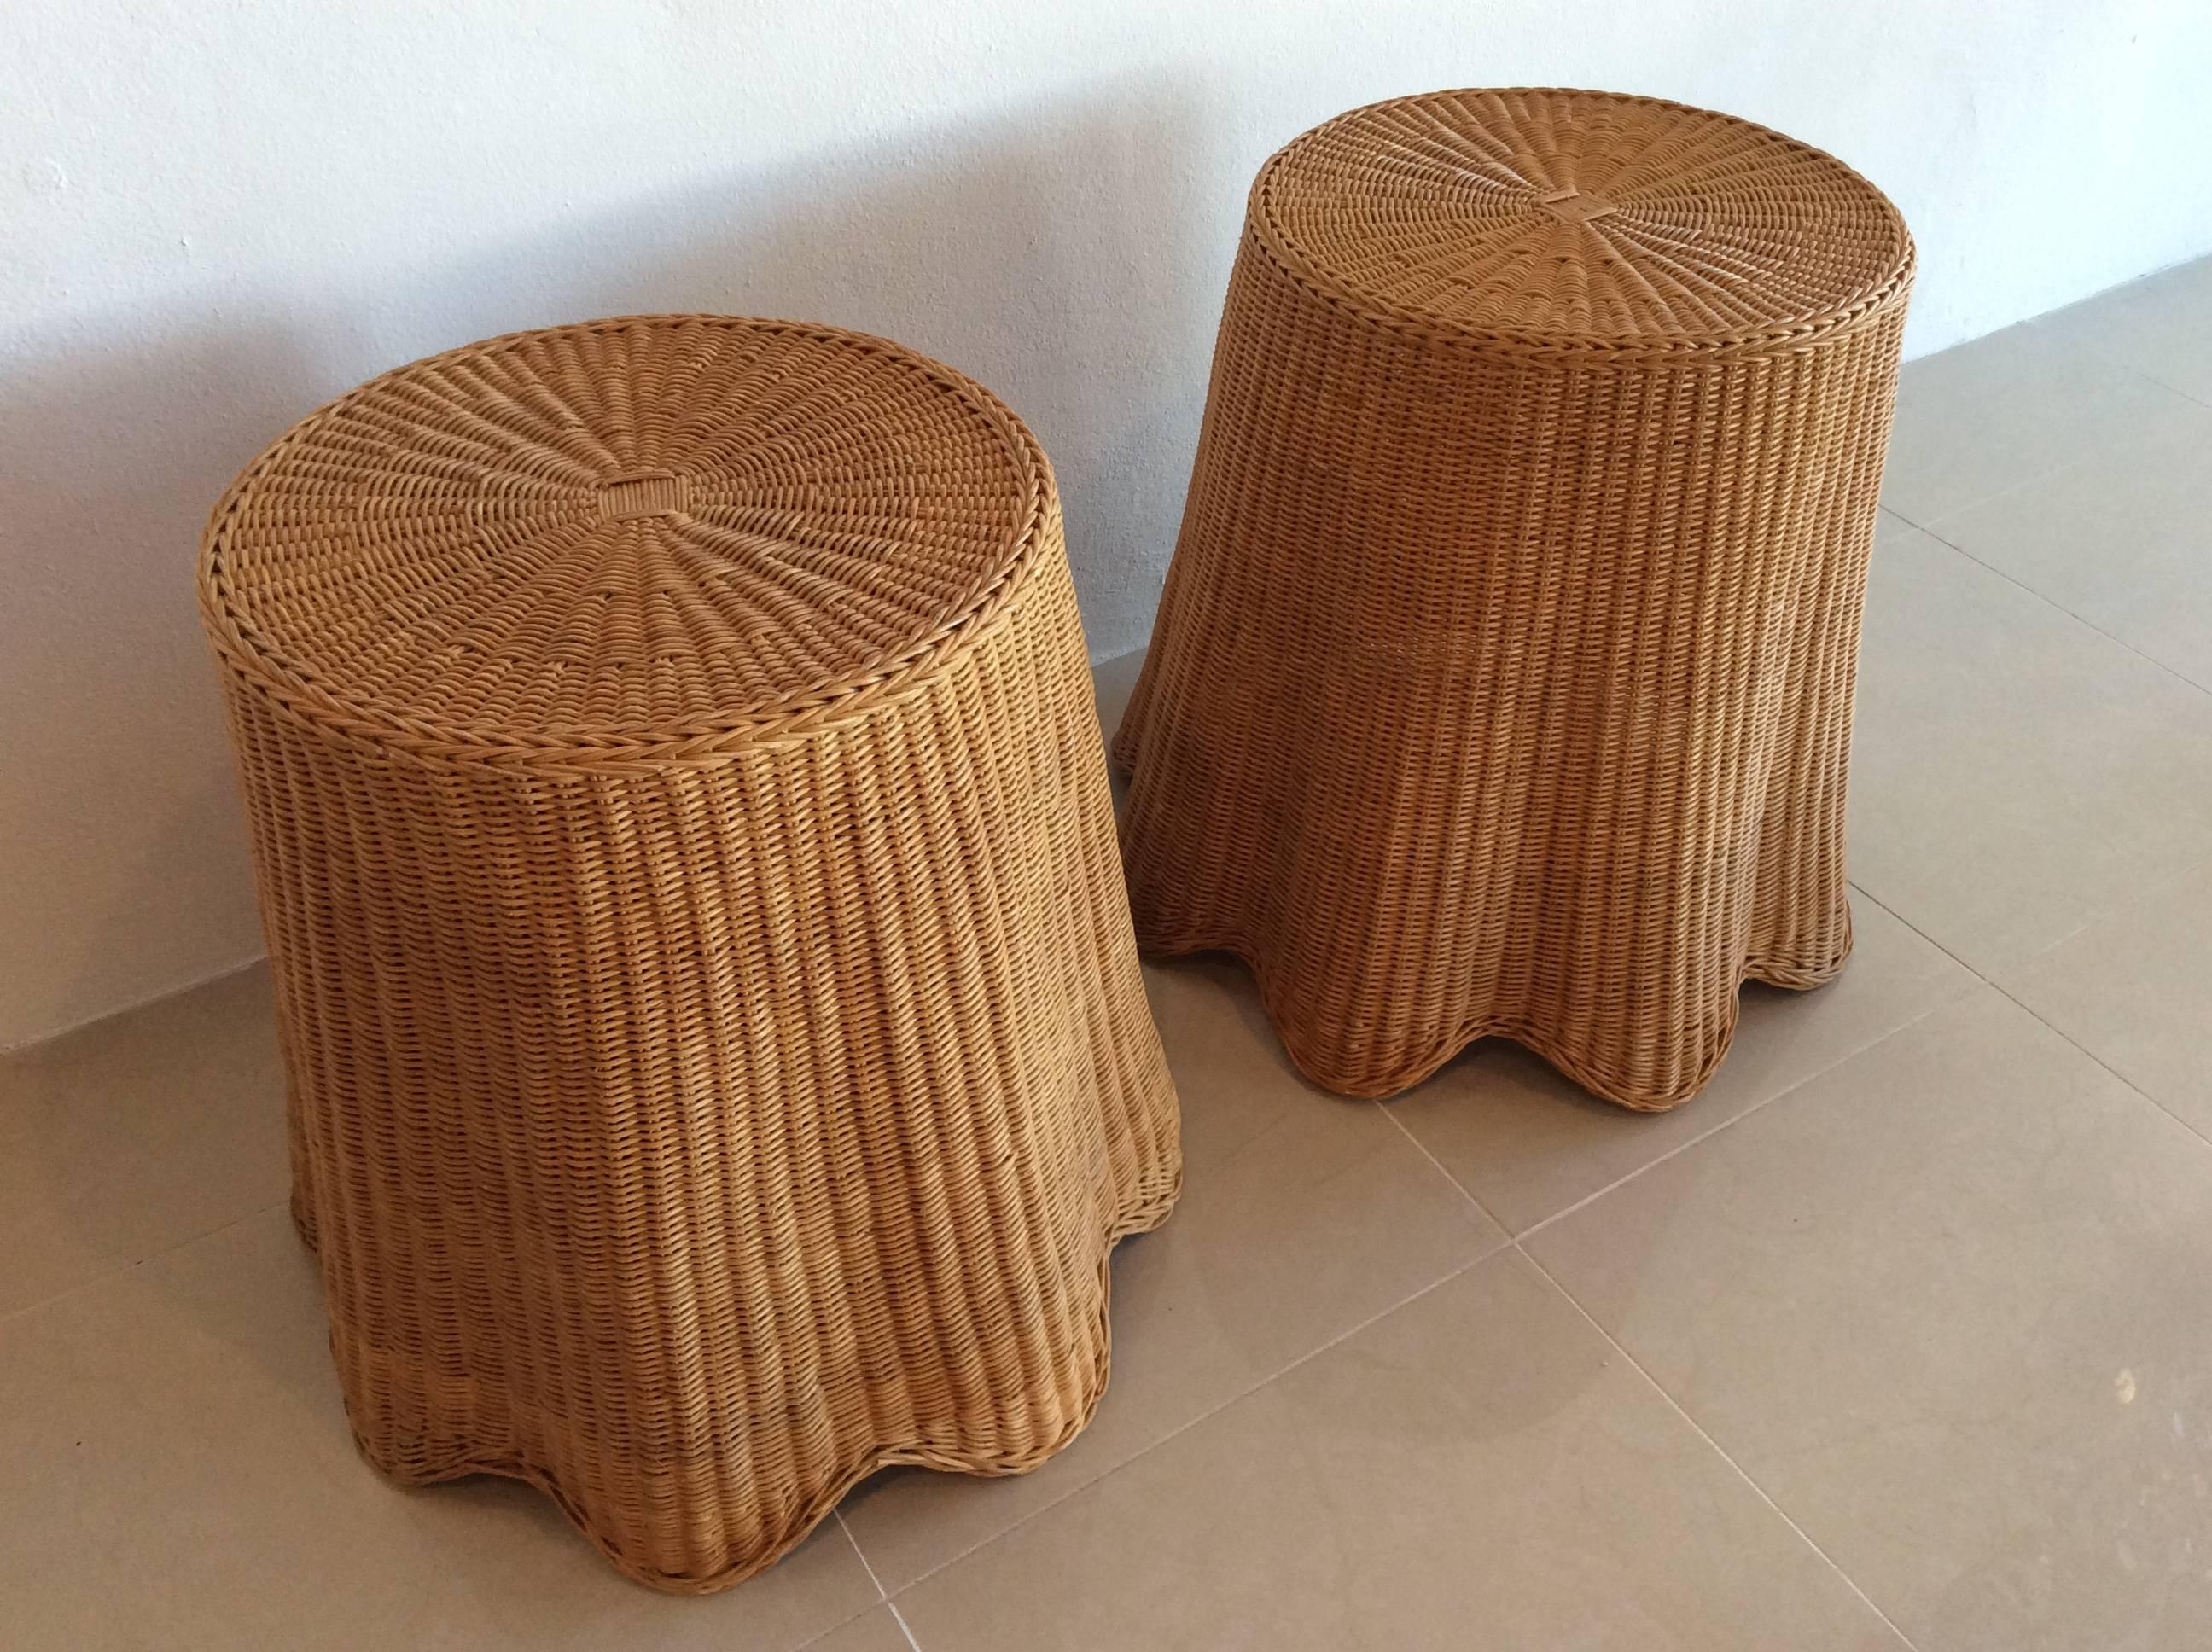 Hollywood Regency Vintage Pair of Wicker Rattan Drapped Drape End Side Tables Palm Beach Tropical